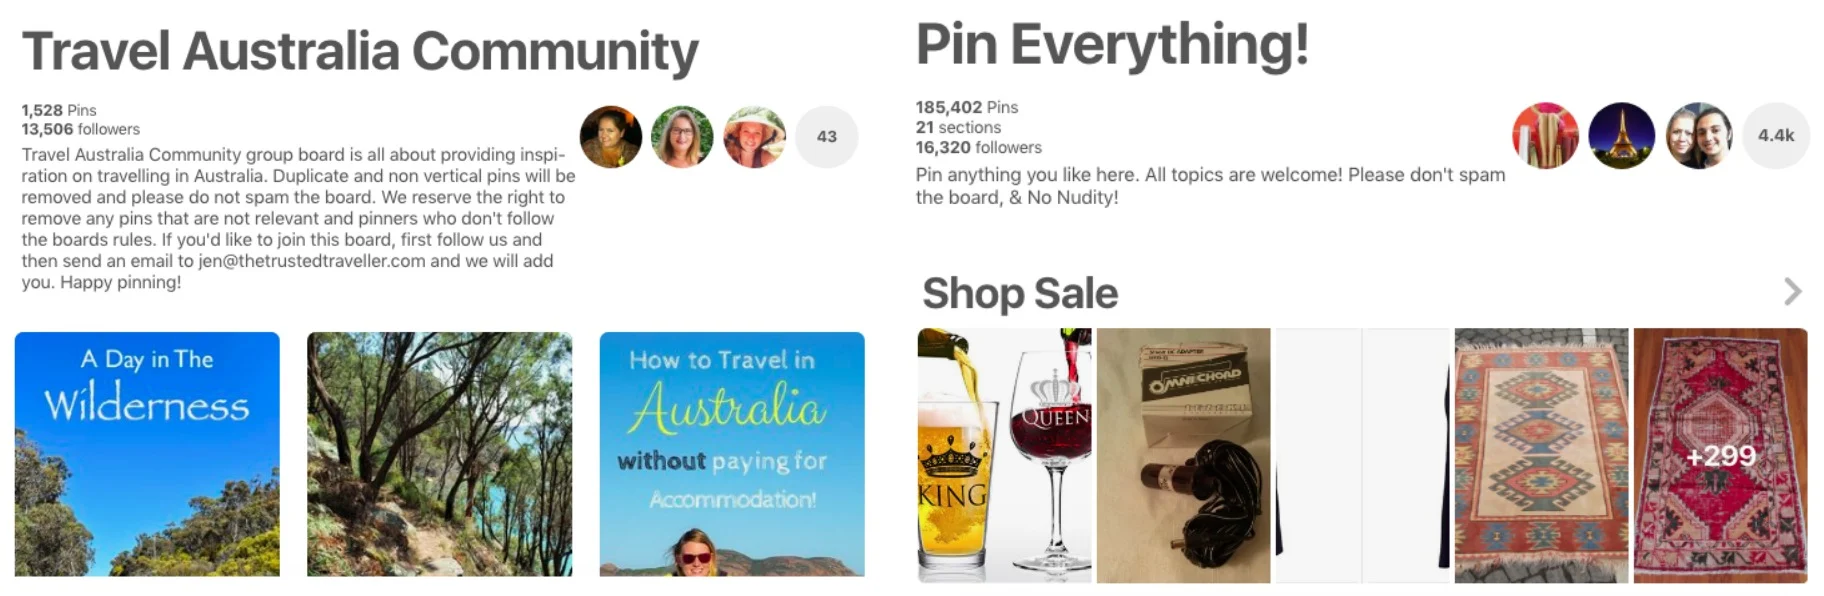 How to use Pinterest for your blog - finding group boards that are relevant to your niche, don't have too many contributors but have more followers than you currently do.